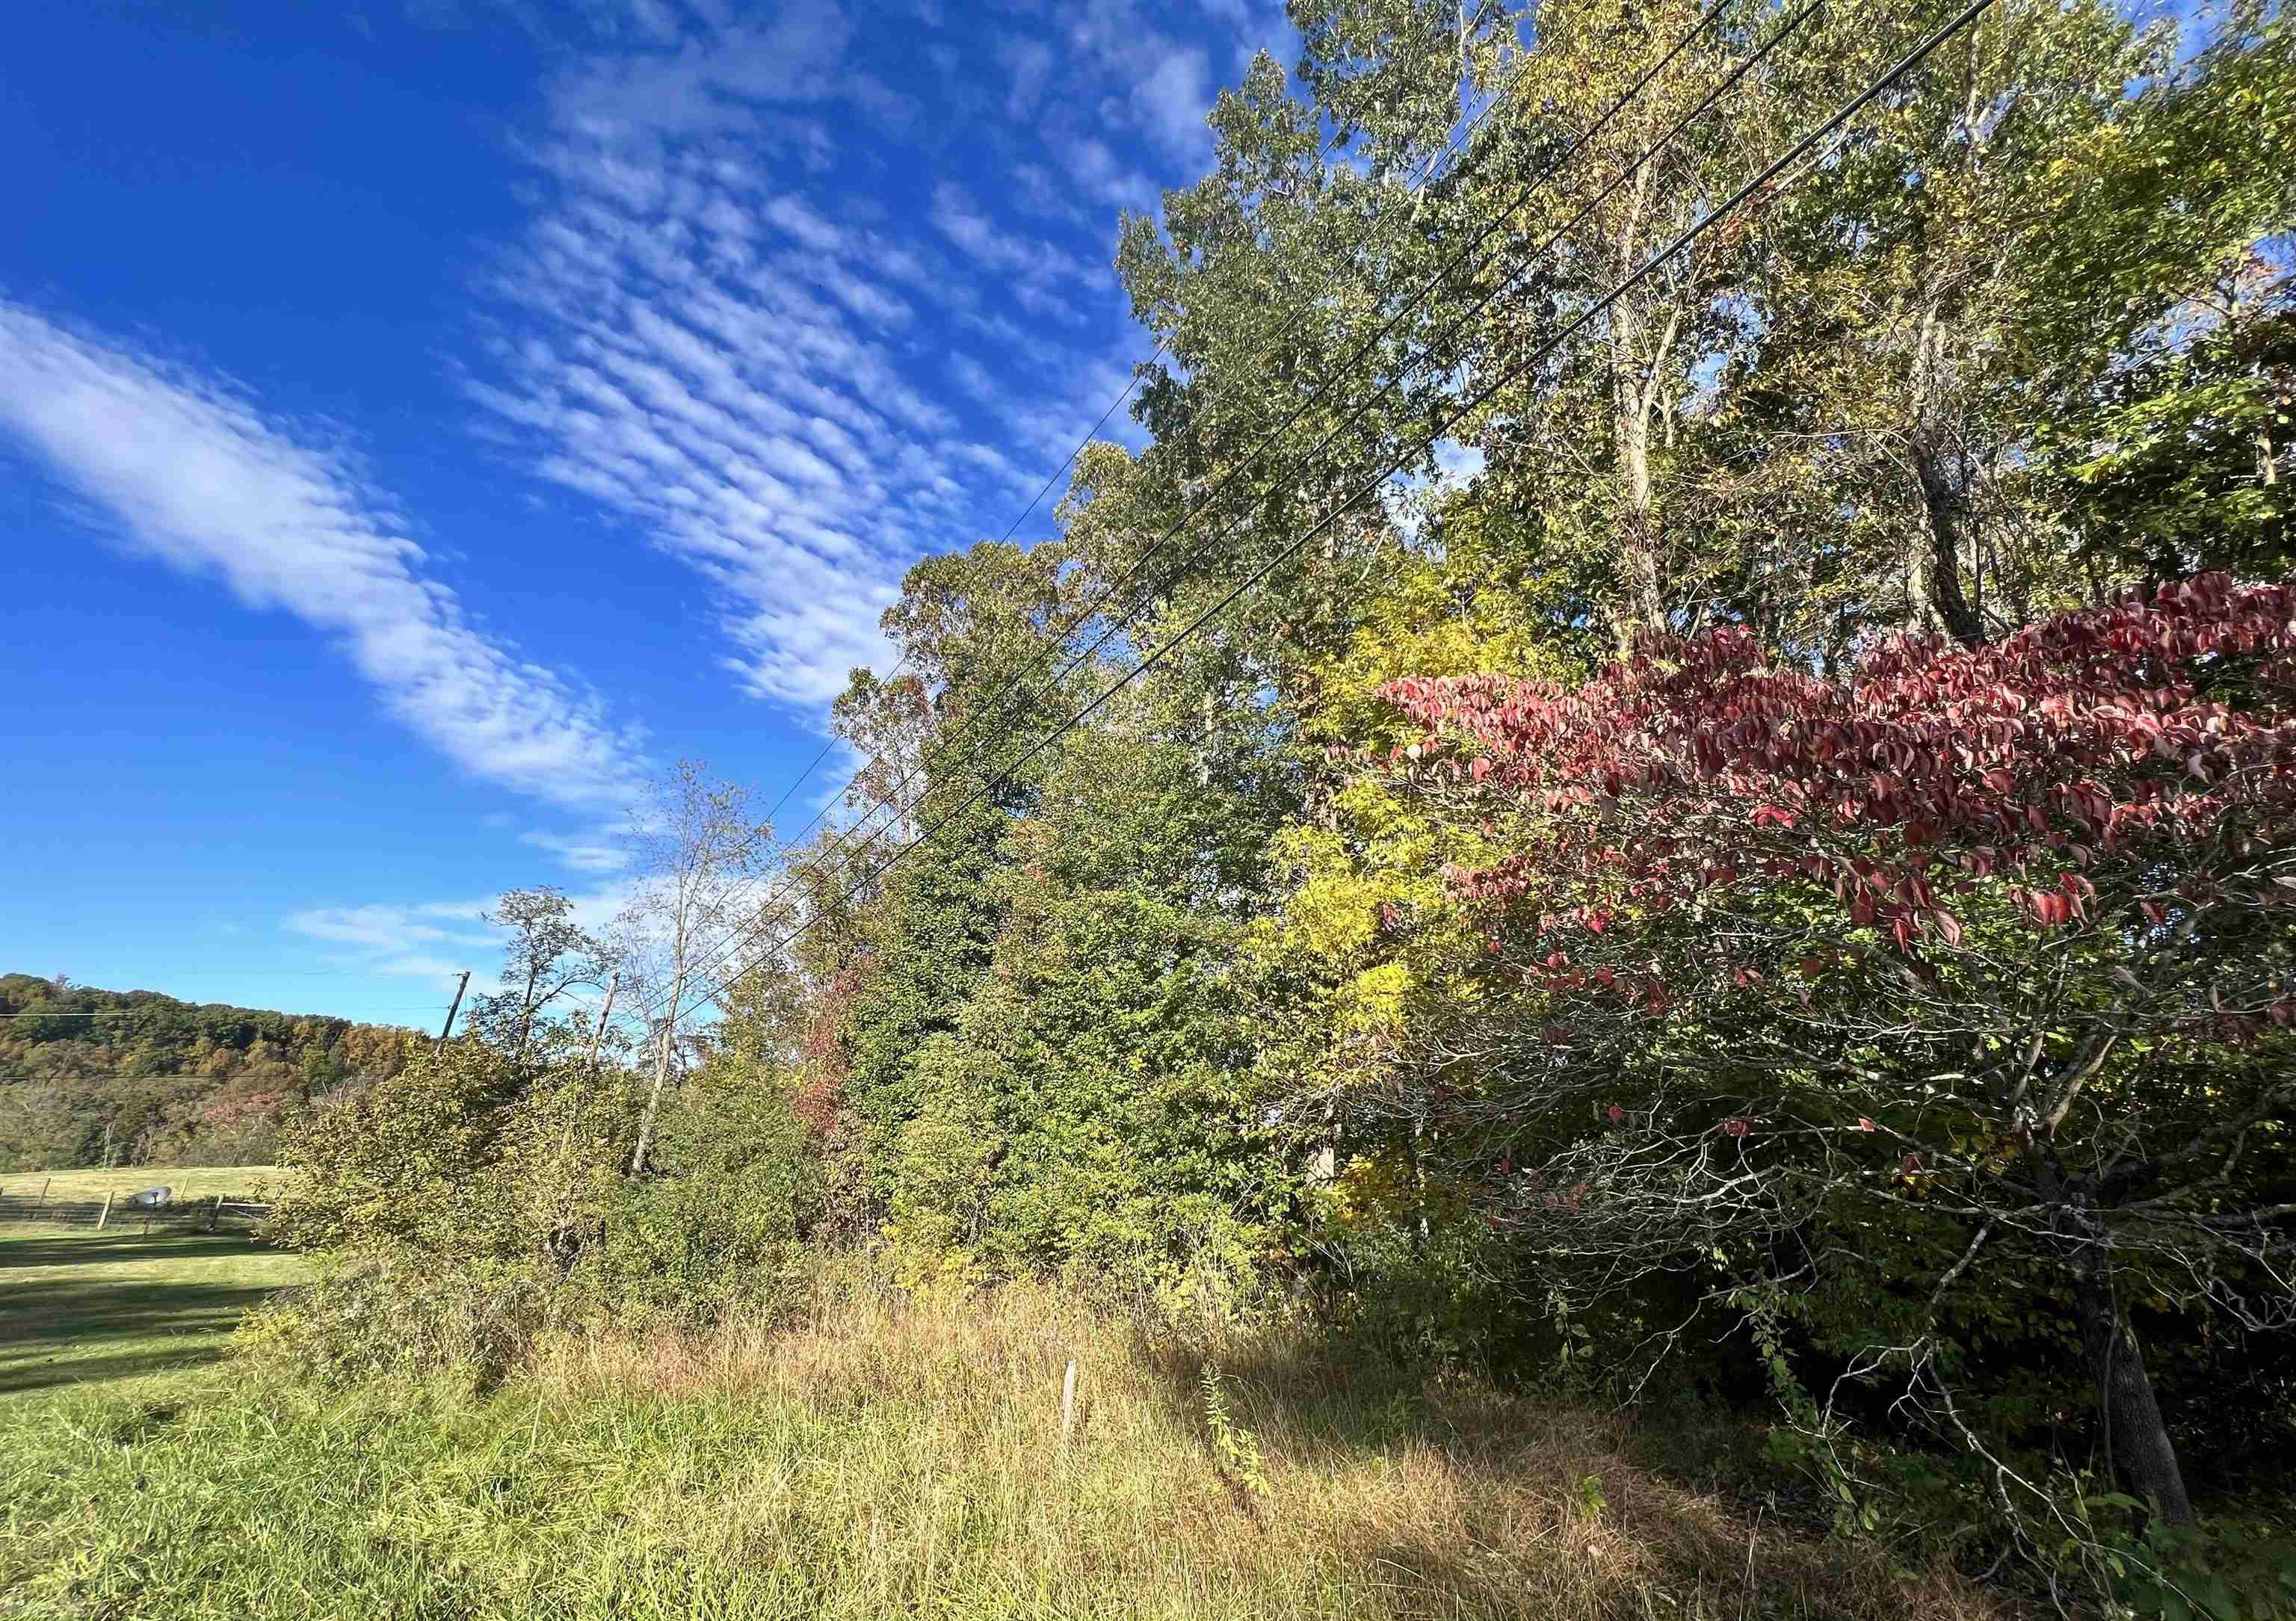 Looking for a convenient location to build, but want privacy and mountain views? This lot fits both! With just over an acre of space, you have unlimited options to build your dream home. This mostly wooded lot offers privacy, shade and great curb appeal. Contact Krista today to see this property.